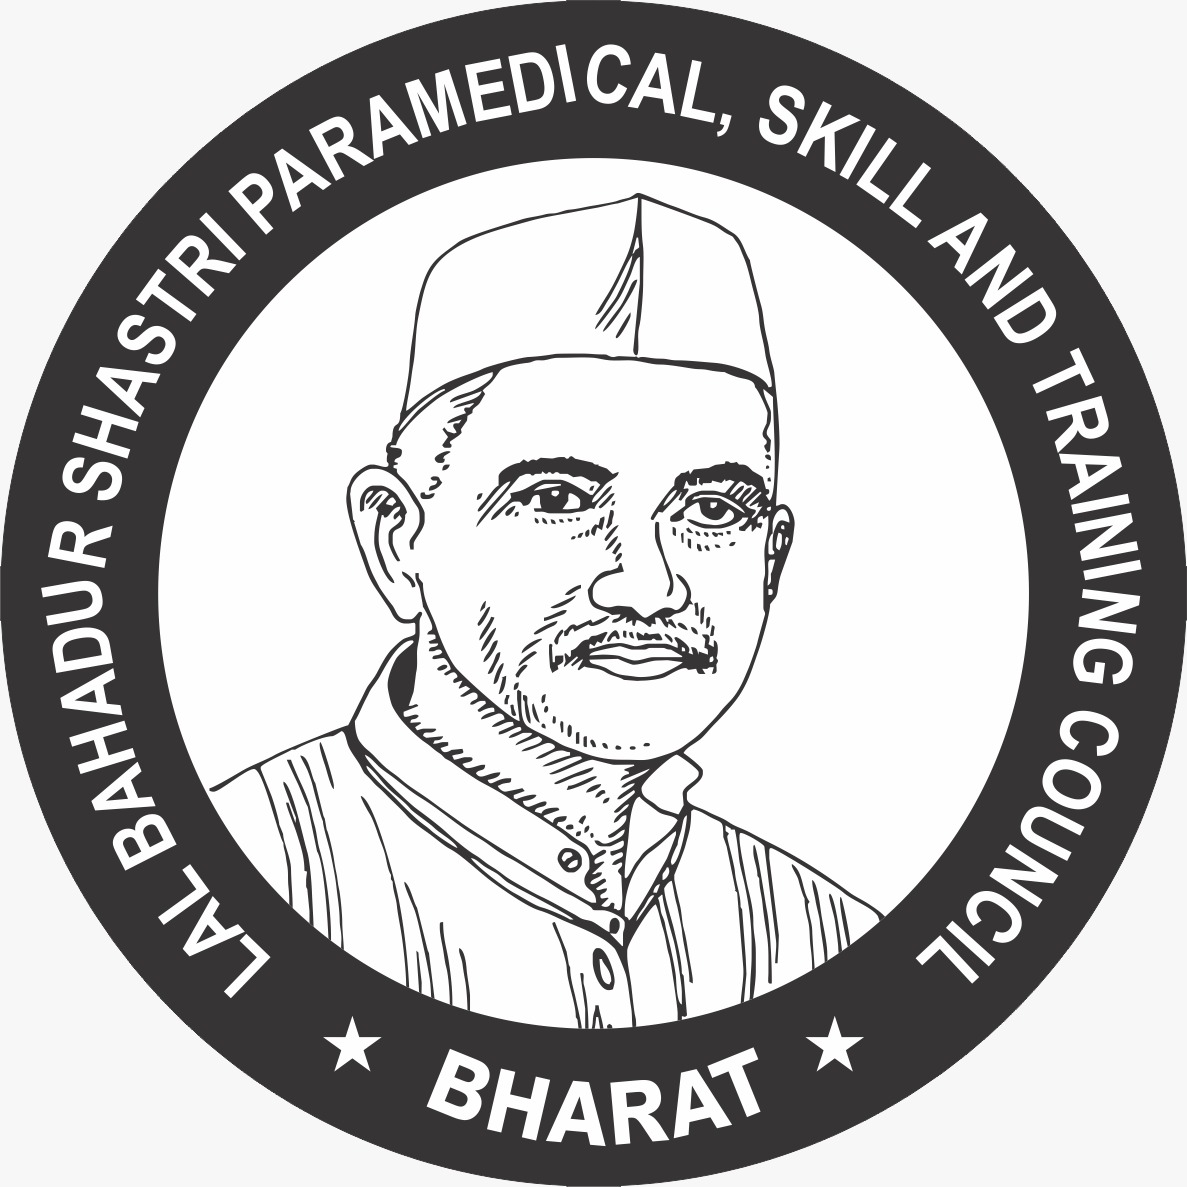 Lal Bahadur Shastri Paramedical Skill and Training Council India (LBSPC) Opportunity to connect new startup for paramedical education Nationwide